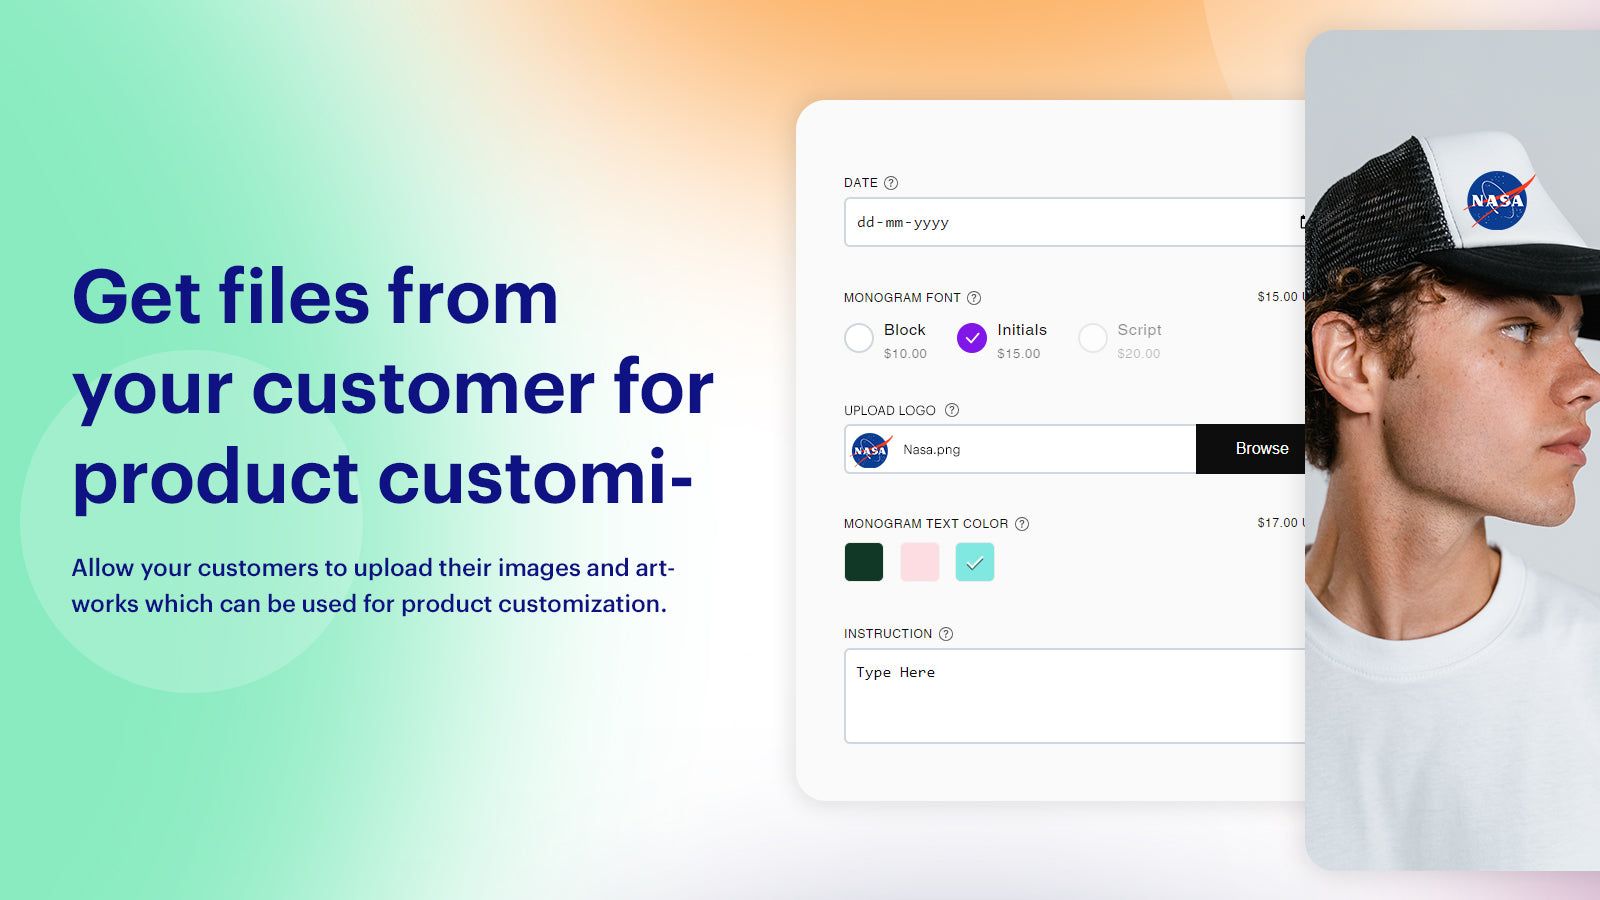 Get files from your customer for product customization